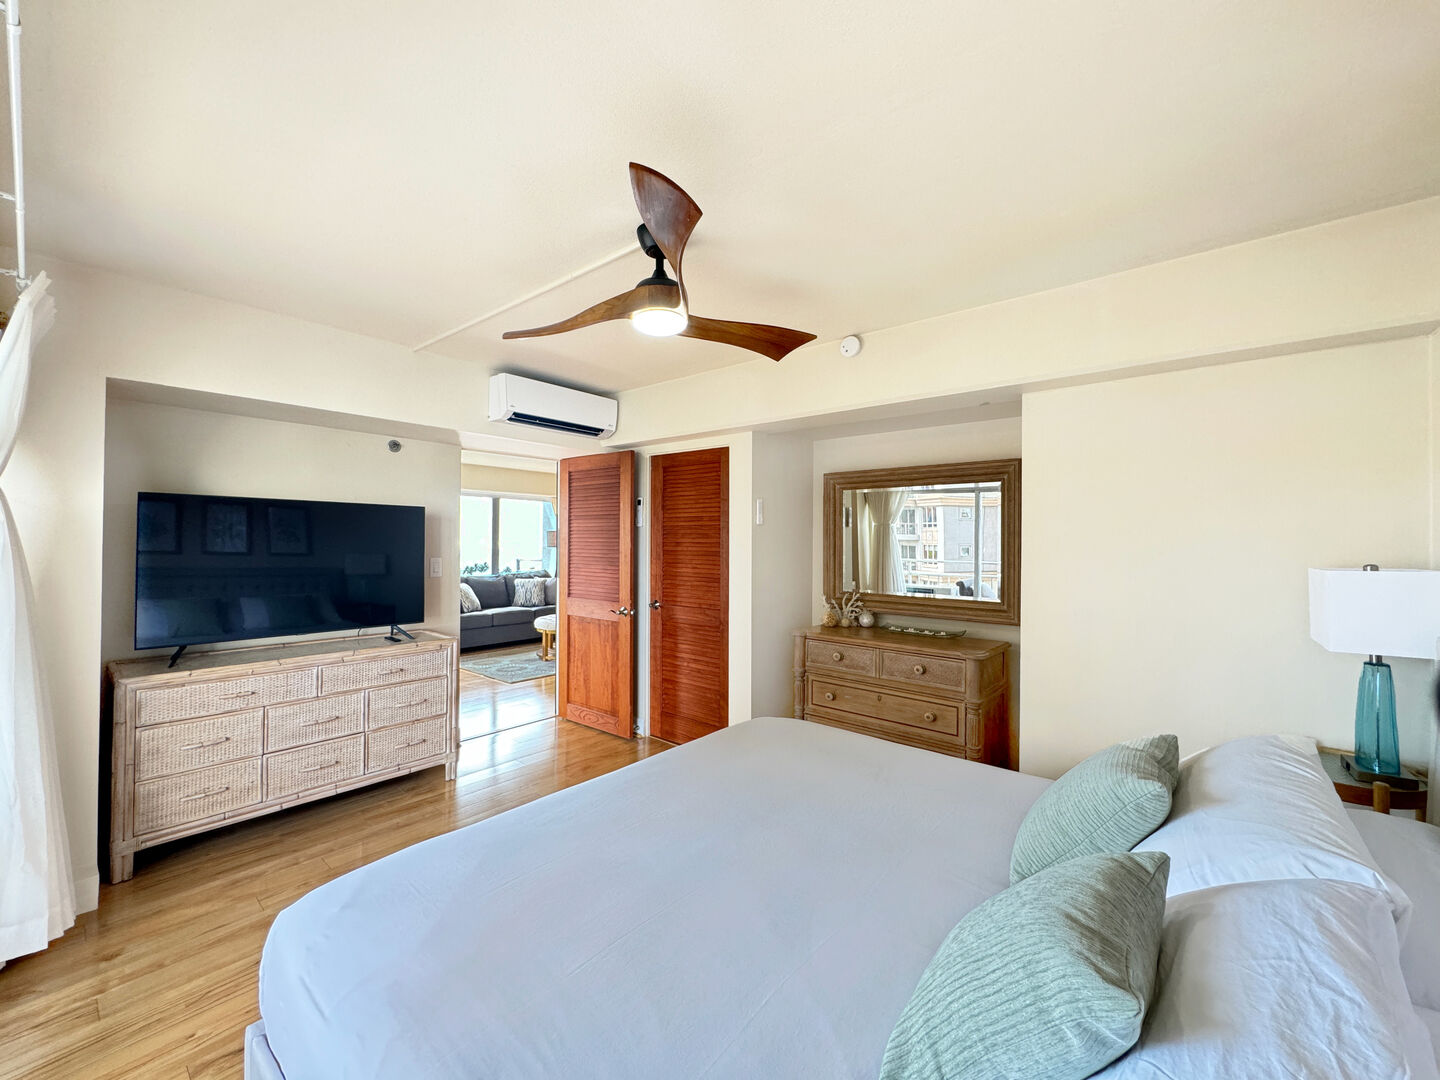 Master bedroom with ceiling fan and wall mounted AC